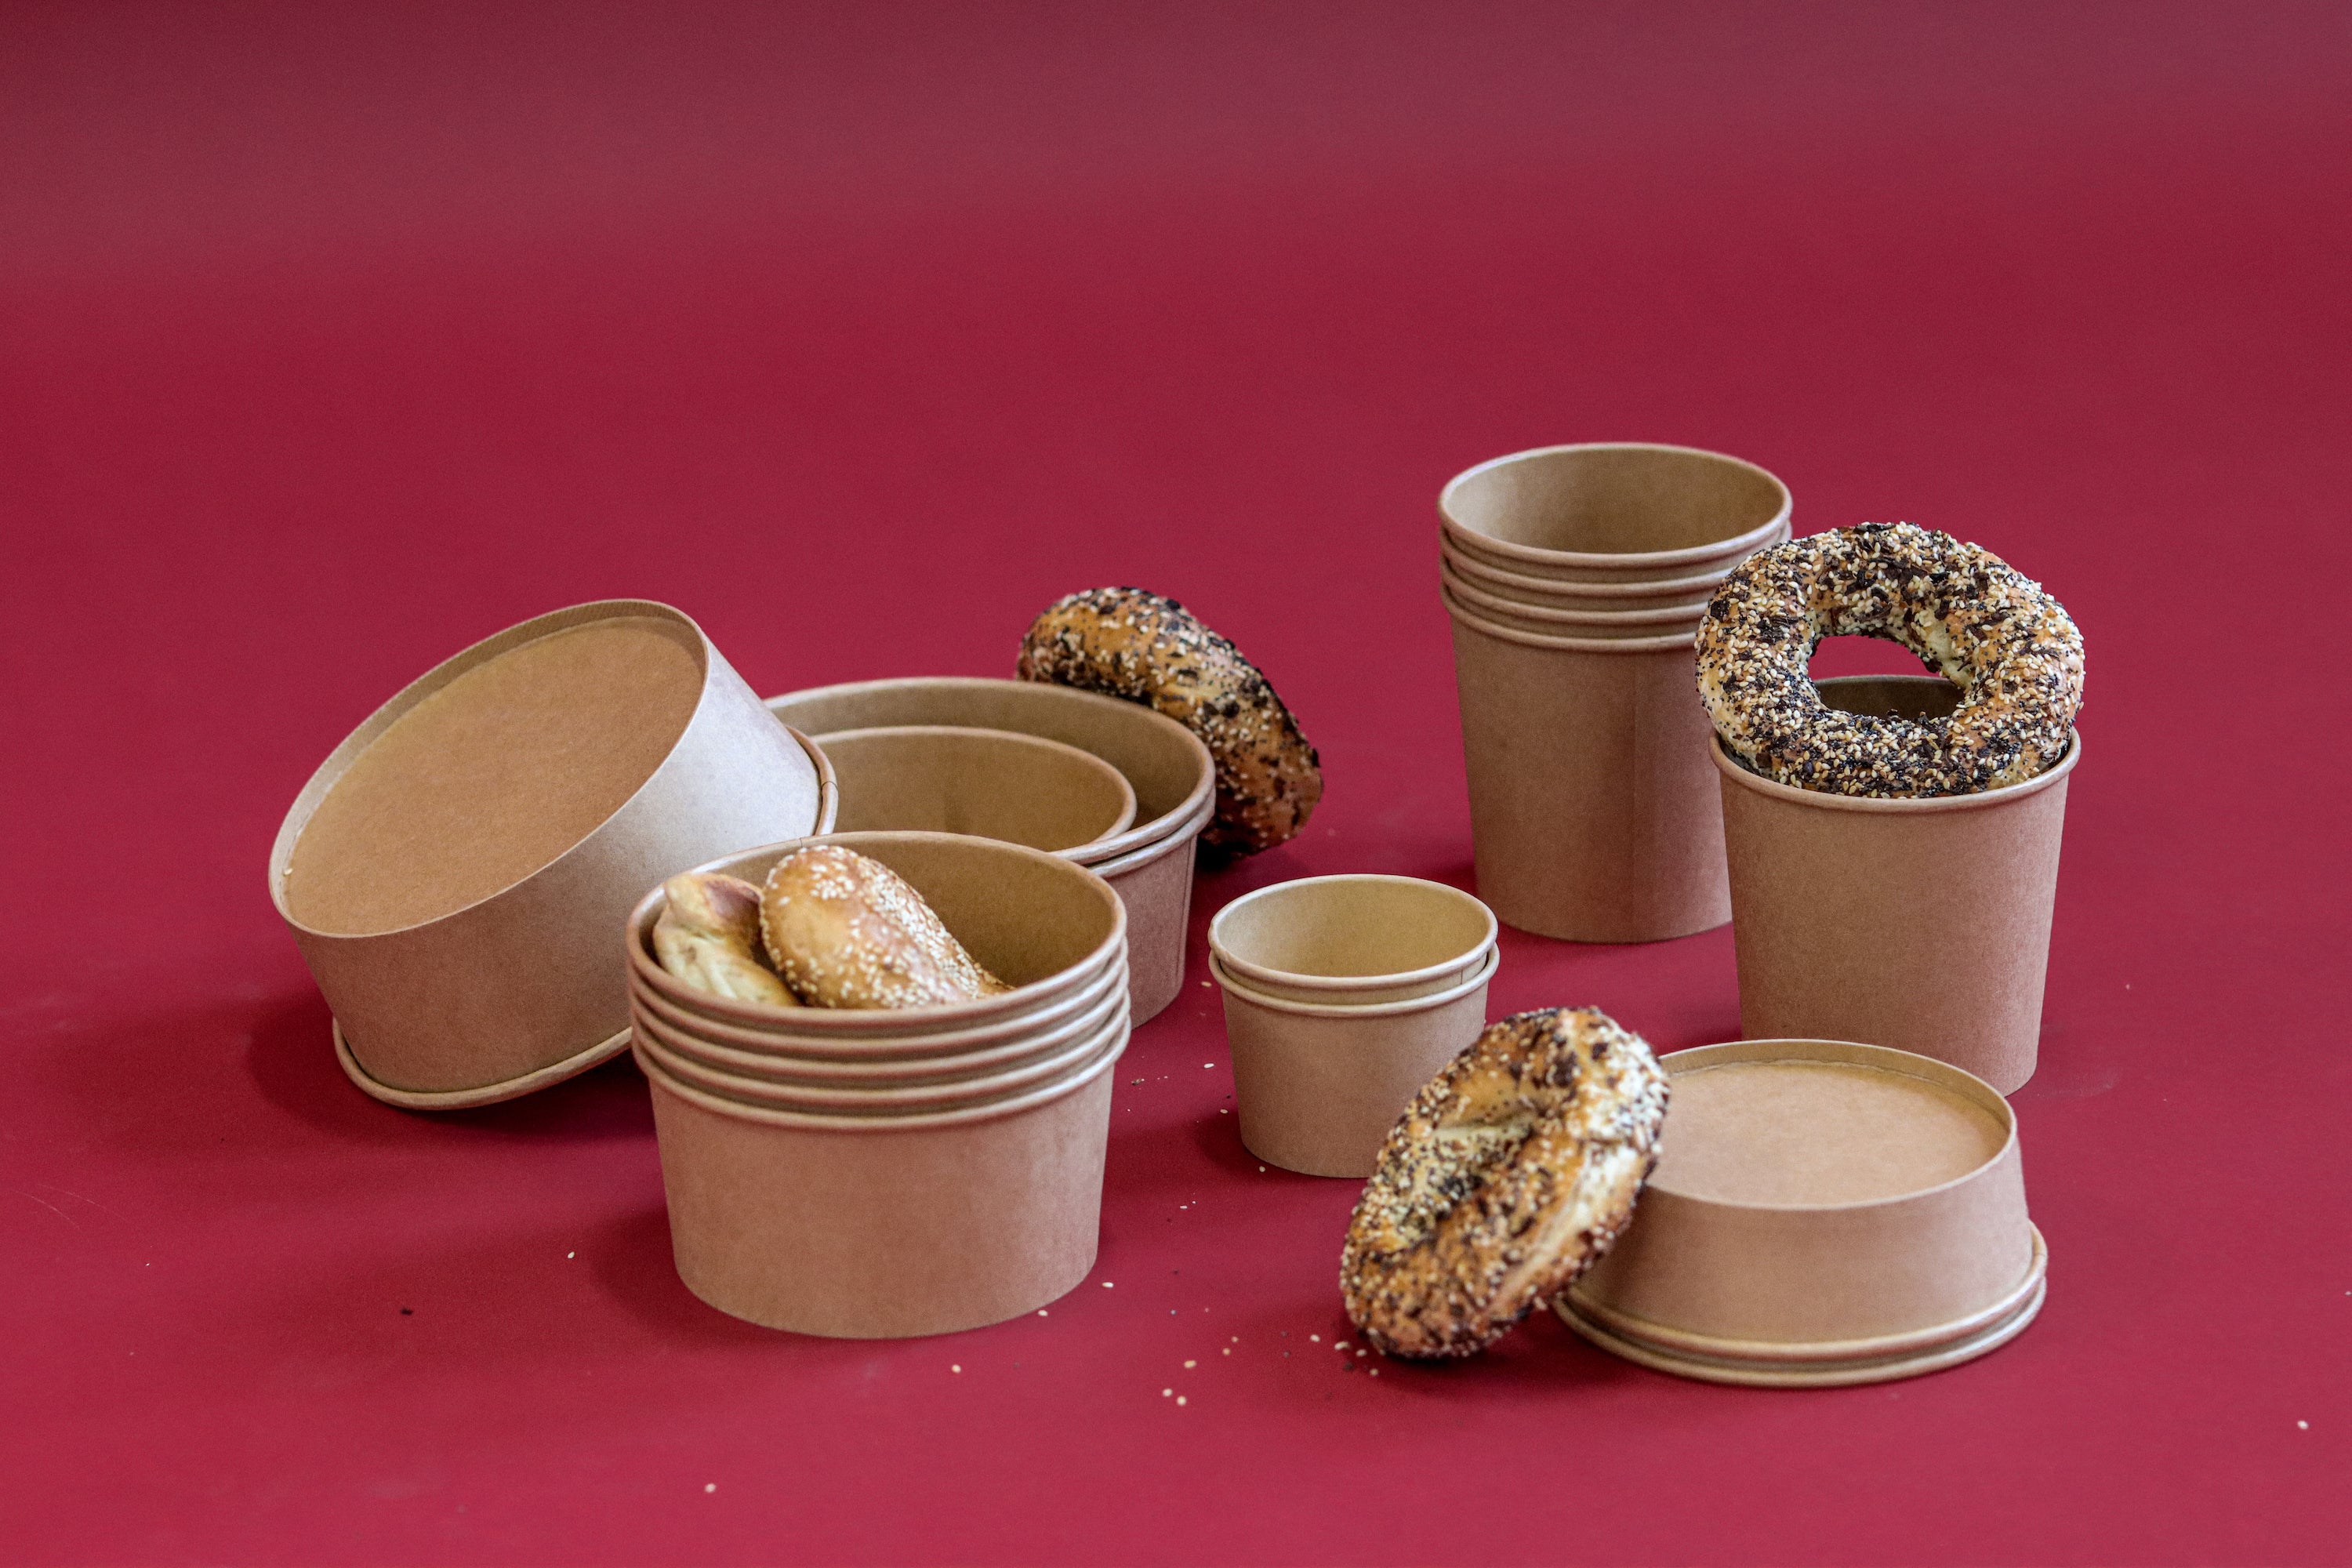 The image shows an assortment of Kraft paper bowls and containers accompanied by bagels with various toppings on a deep red background, evoking a casual, eco-friendly dining or takeout concept.